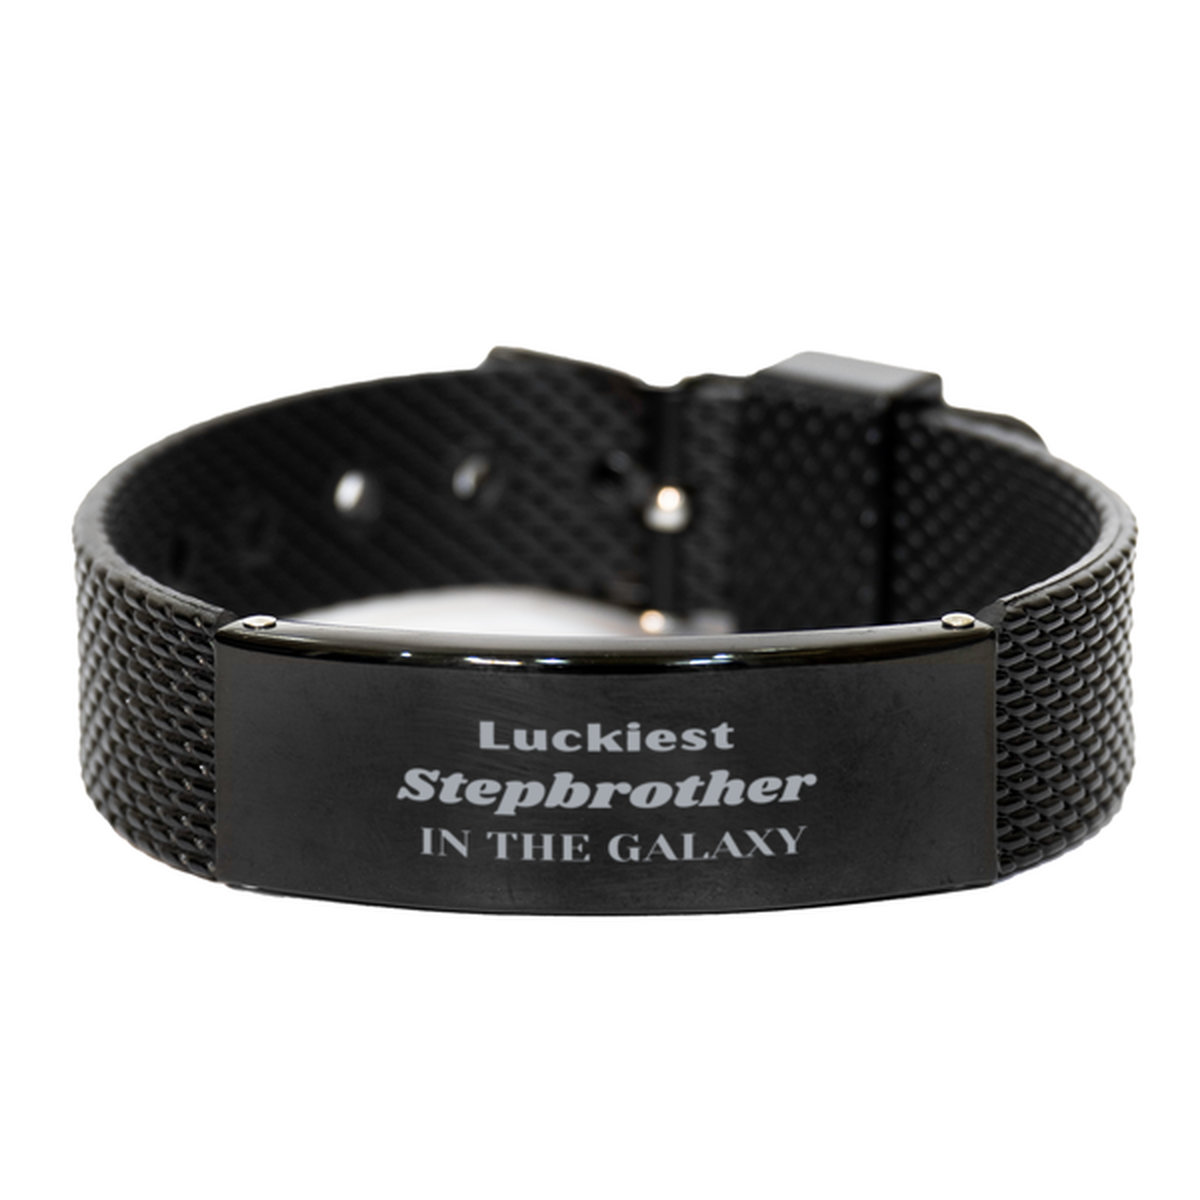 Luckiest Stepbrother in the Galaxy, To My Stepbrother Engraved Gifts, Christmas Stepbrother Black Shark Mesh Bracelet Gifts, X-mas Birthday Unique Gifts For Stepbrother Men Women